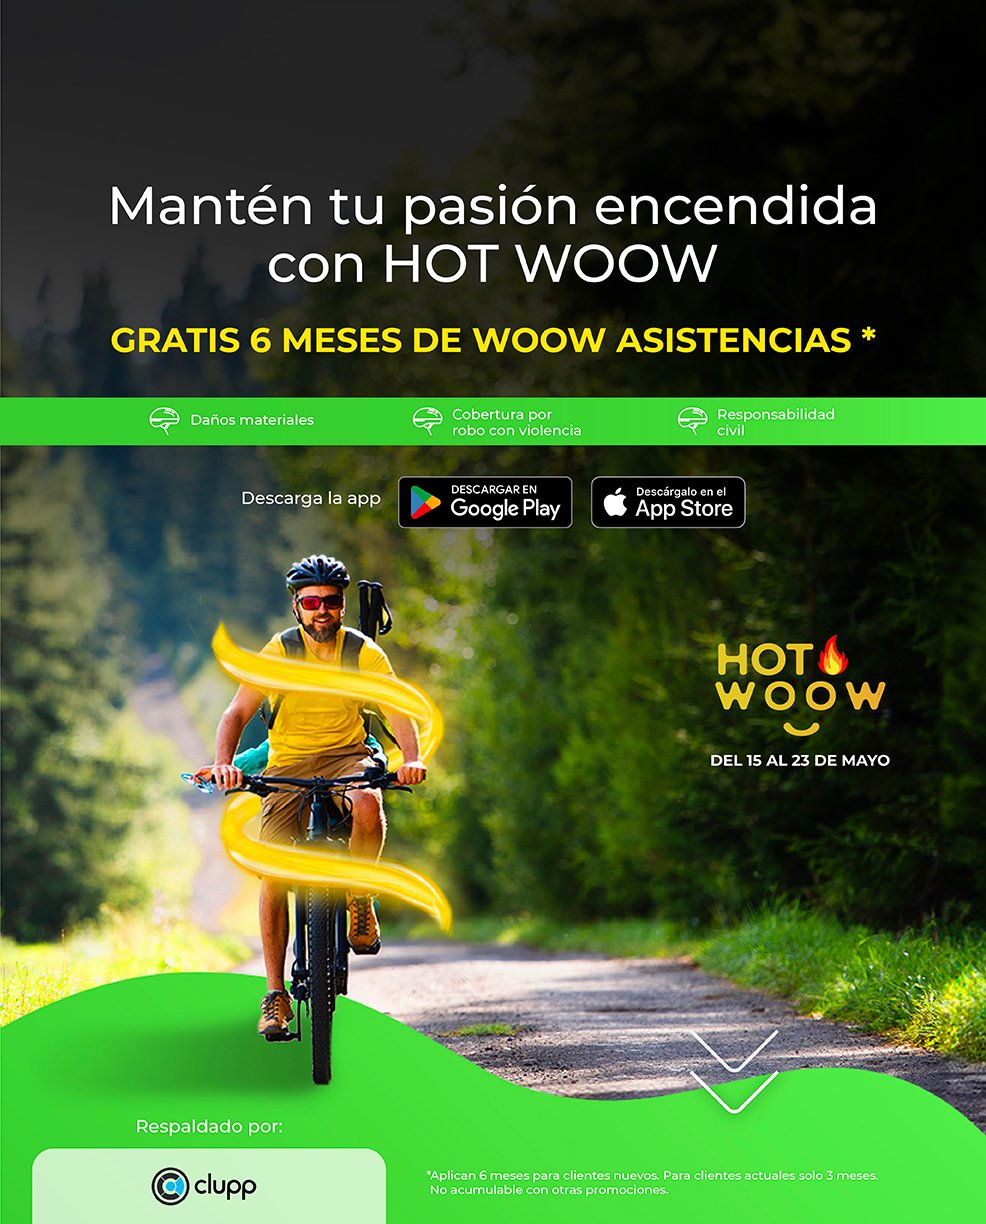 woow-hotwoow_24-hero-mobile-11_bici